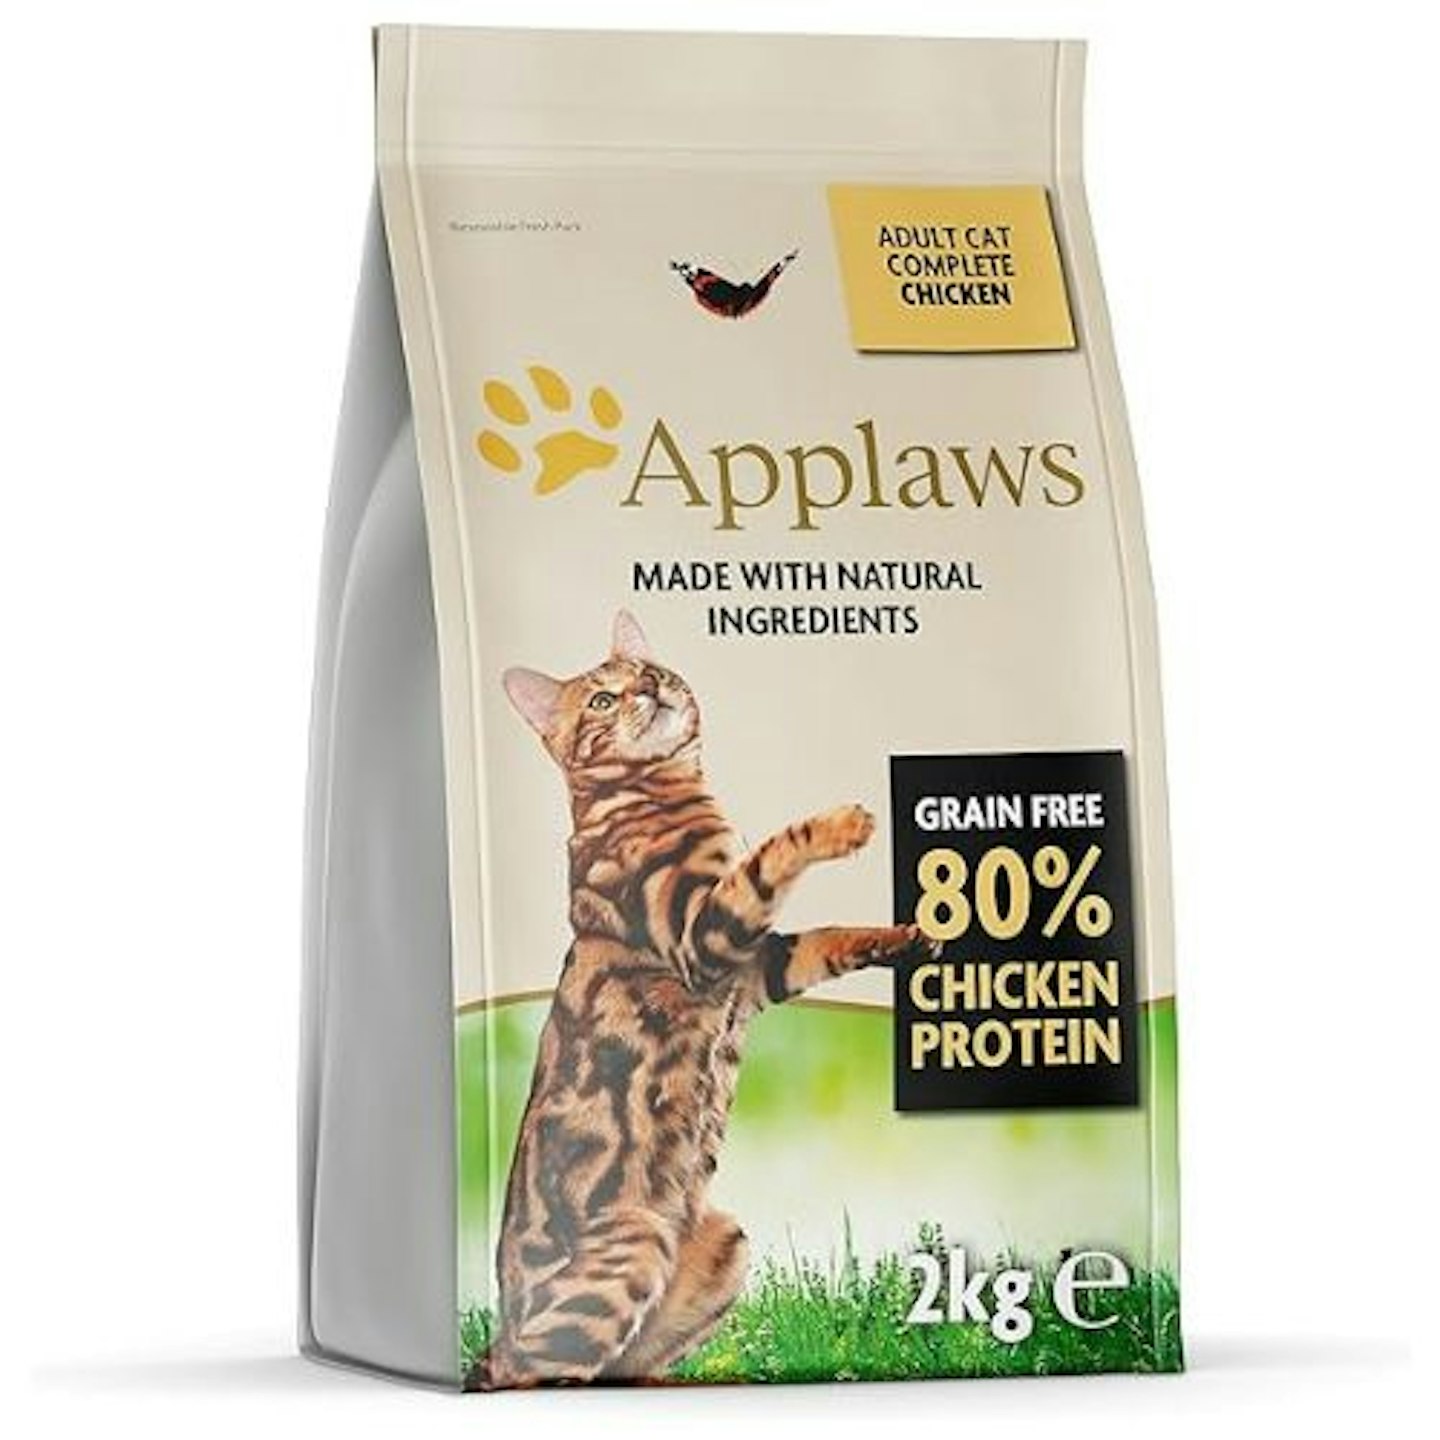 Applaws Complete Natural and Grain Free Dry Adult Cat Food